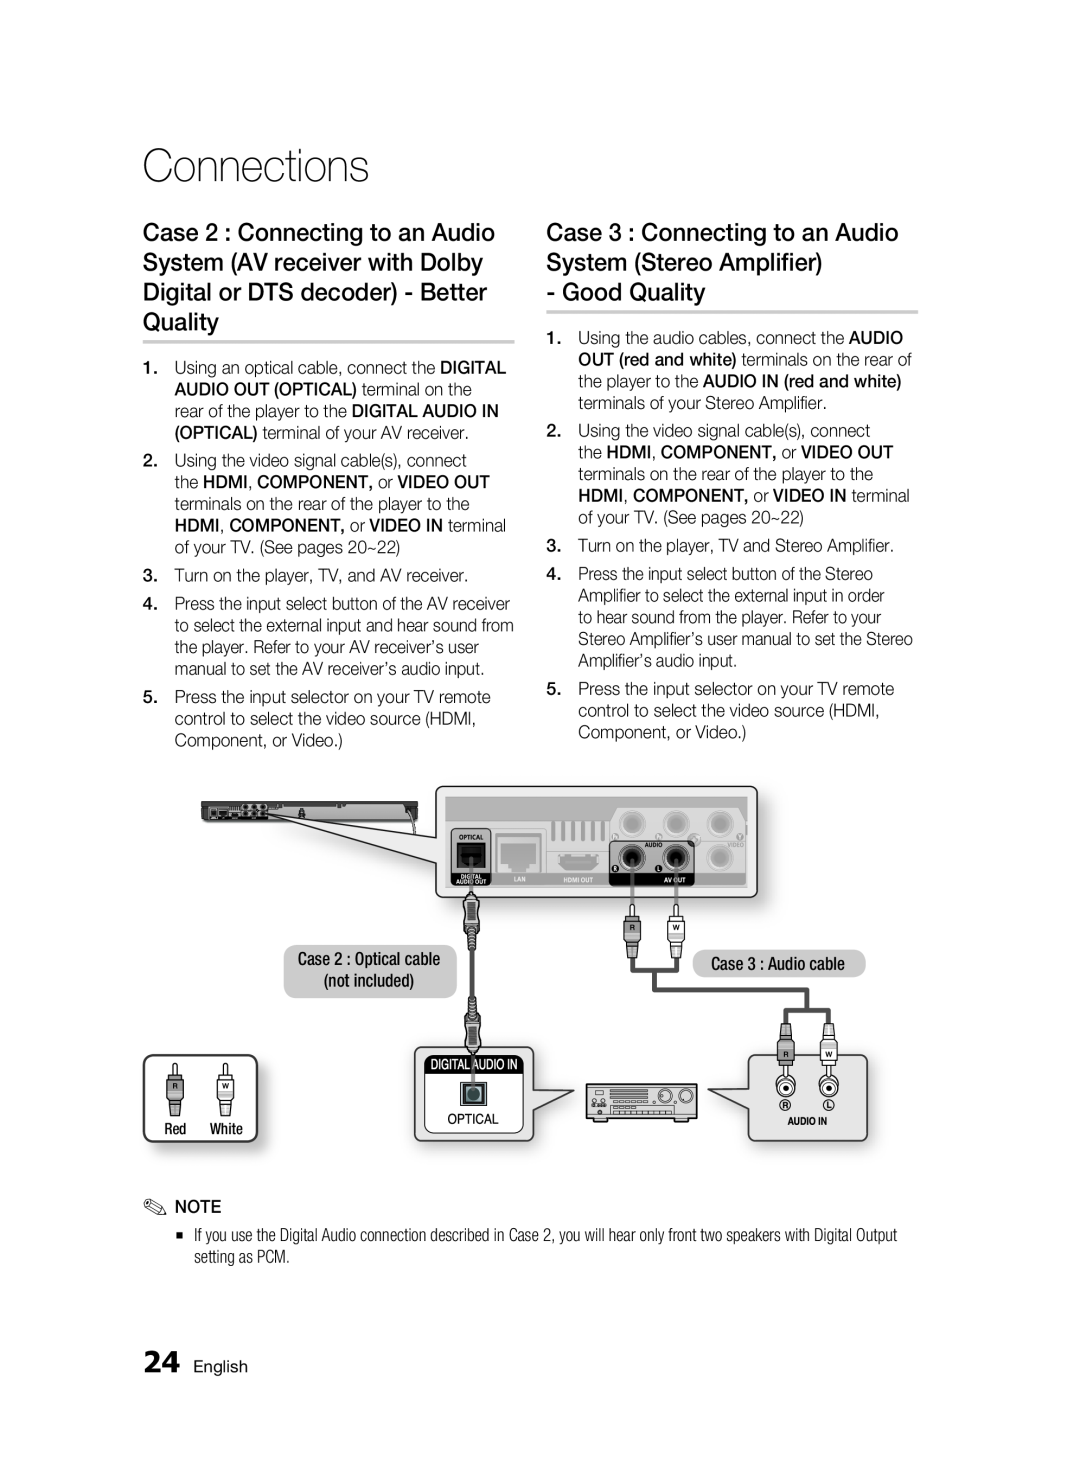 Samsung BD-D6500 user manual Case 3 Connecting to an Audio System Stereo Amplifier Good Quality, Connections, English 